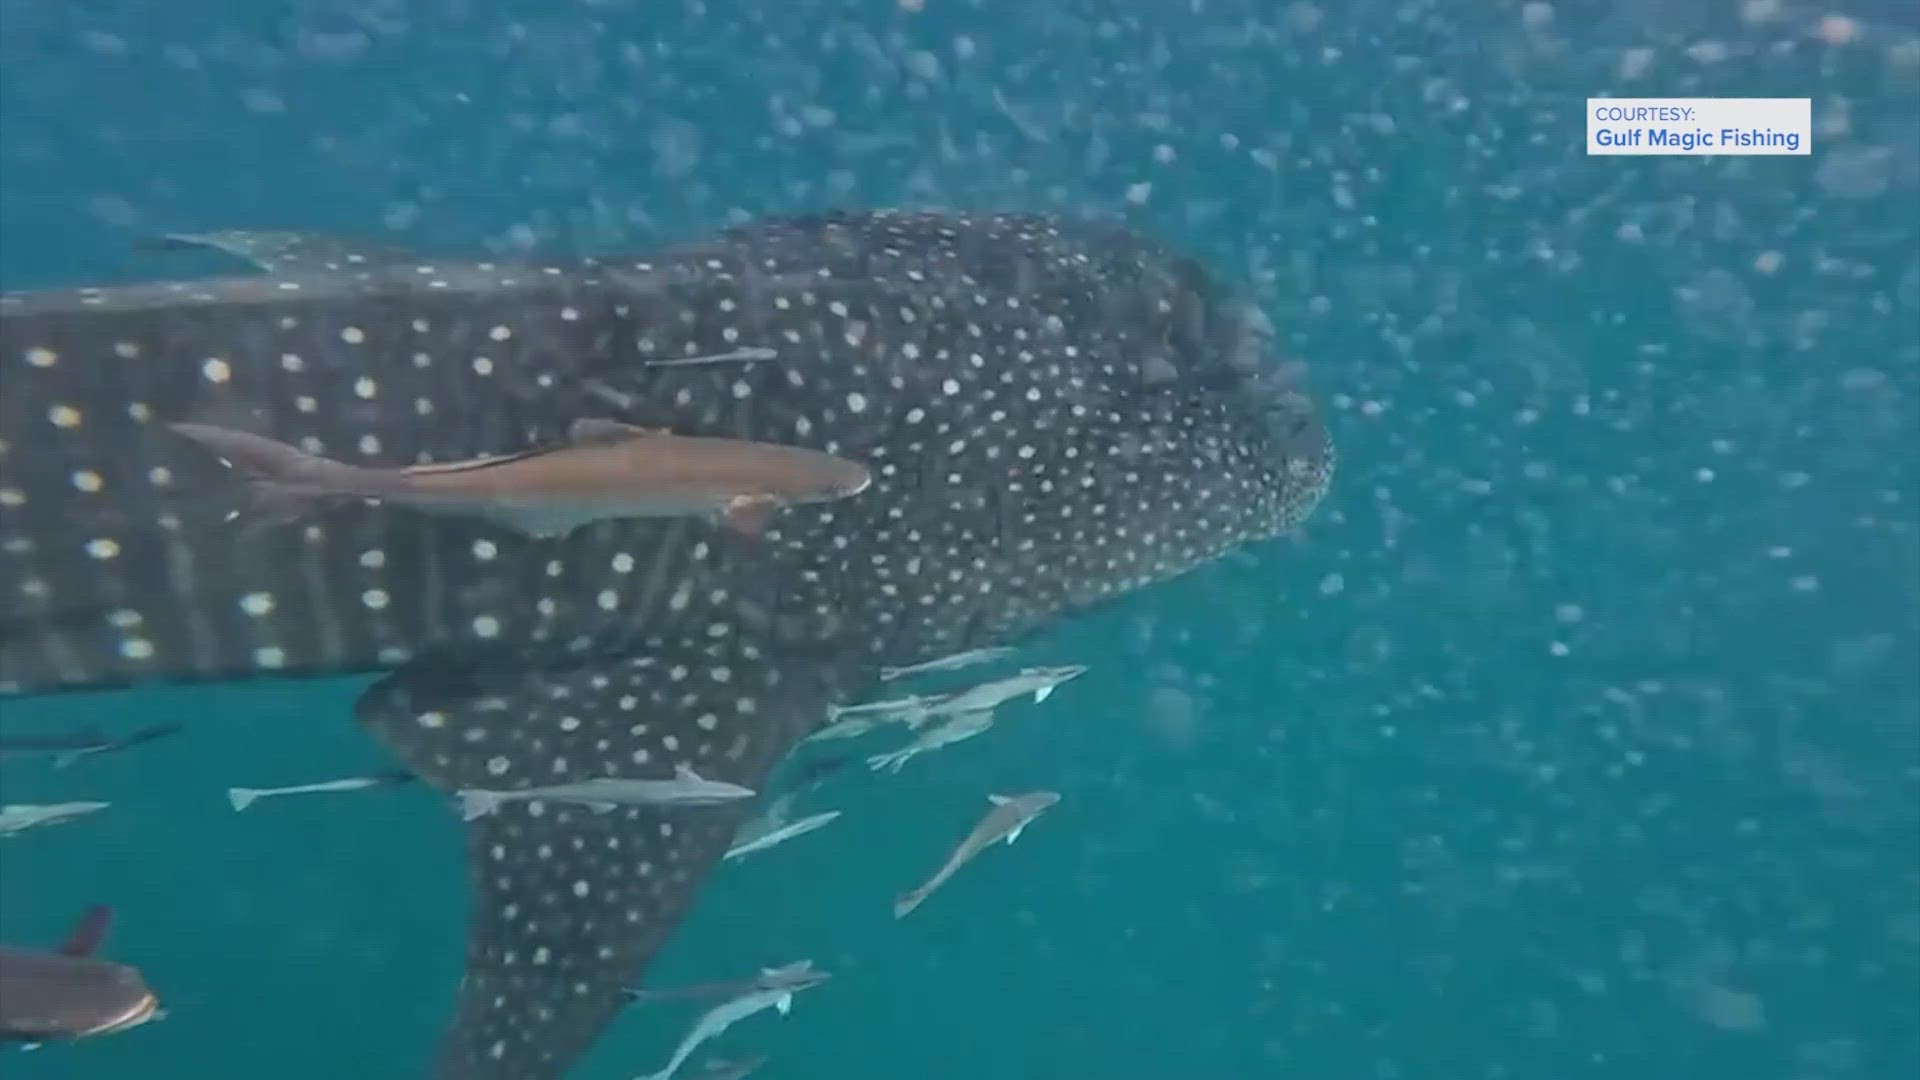 A whale shark, the biggest fish in the world, was recently spotted just 6 miles off the Texas coast.